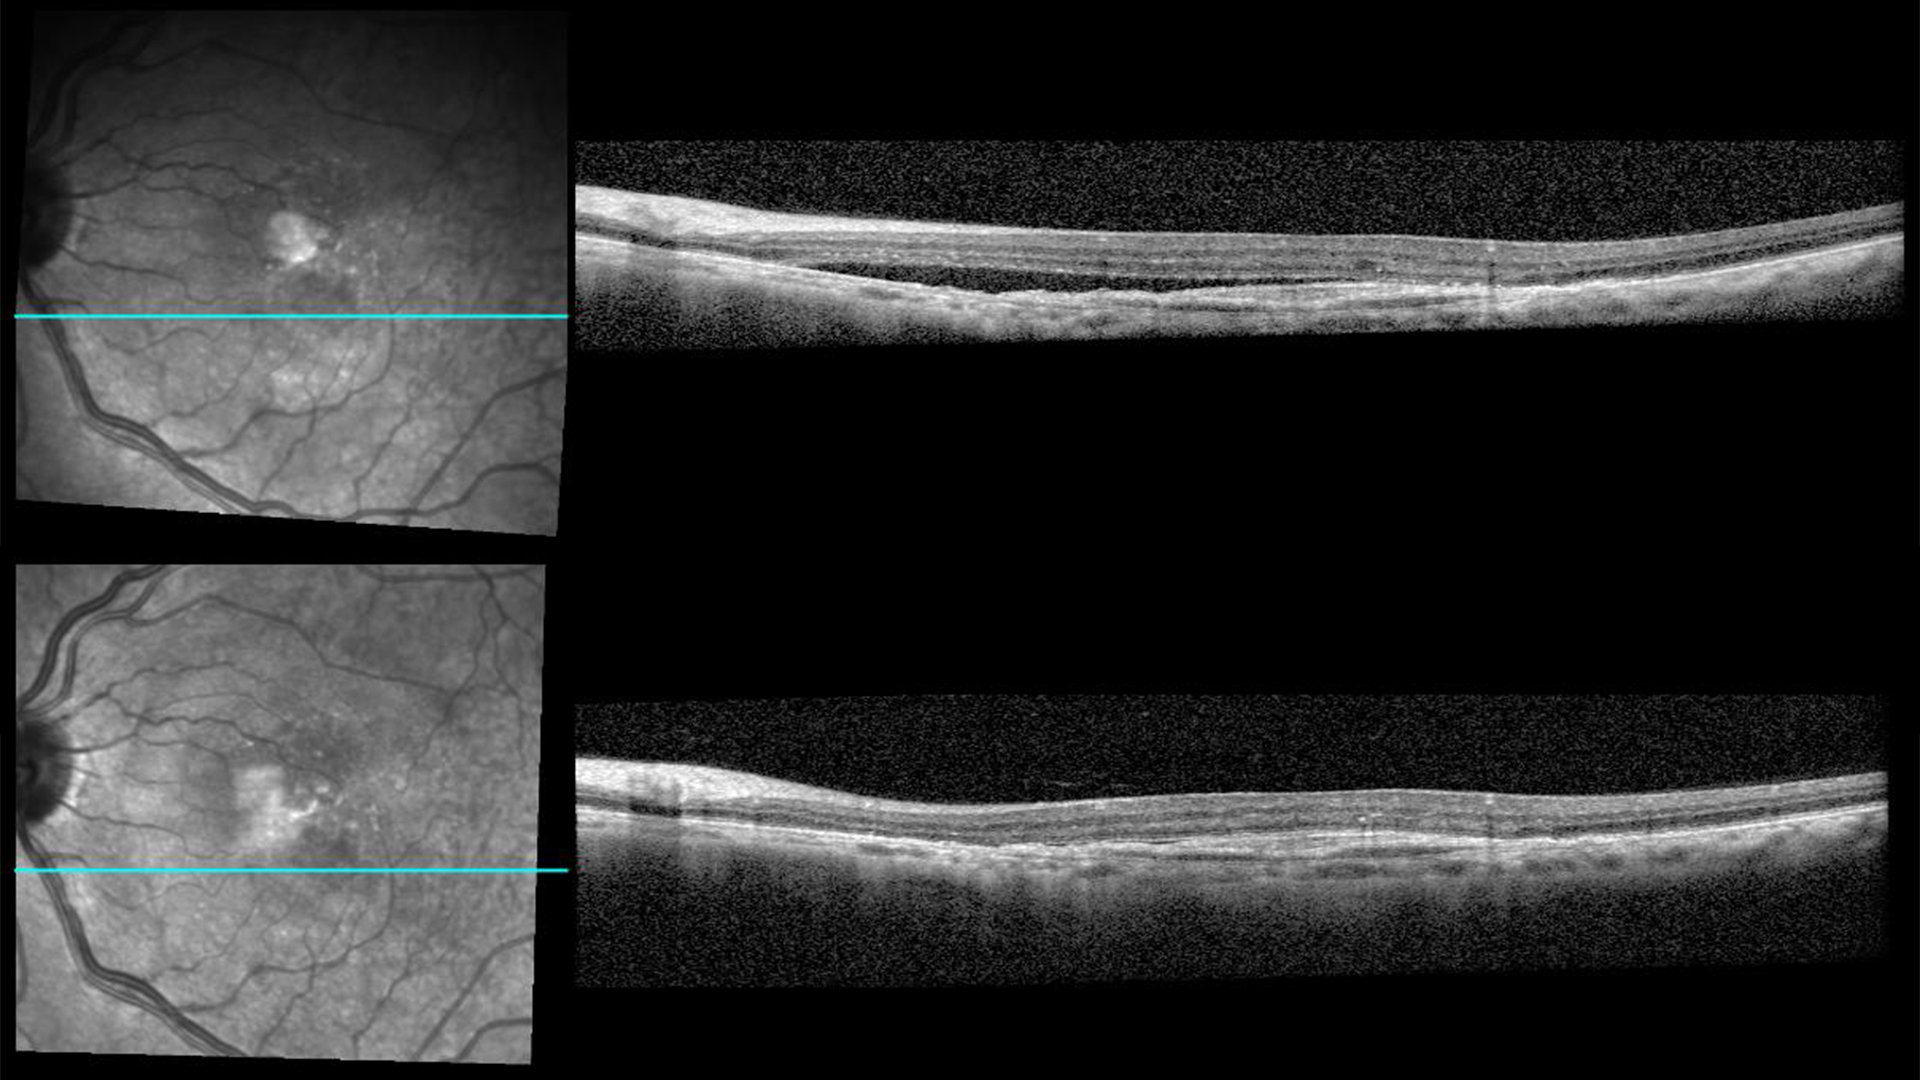 Optical coherence tomography (OCT) image of an eye before (top) and four weeks after (bottom) intravitreal aflibercept injection